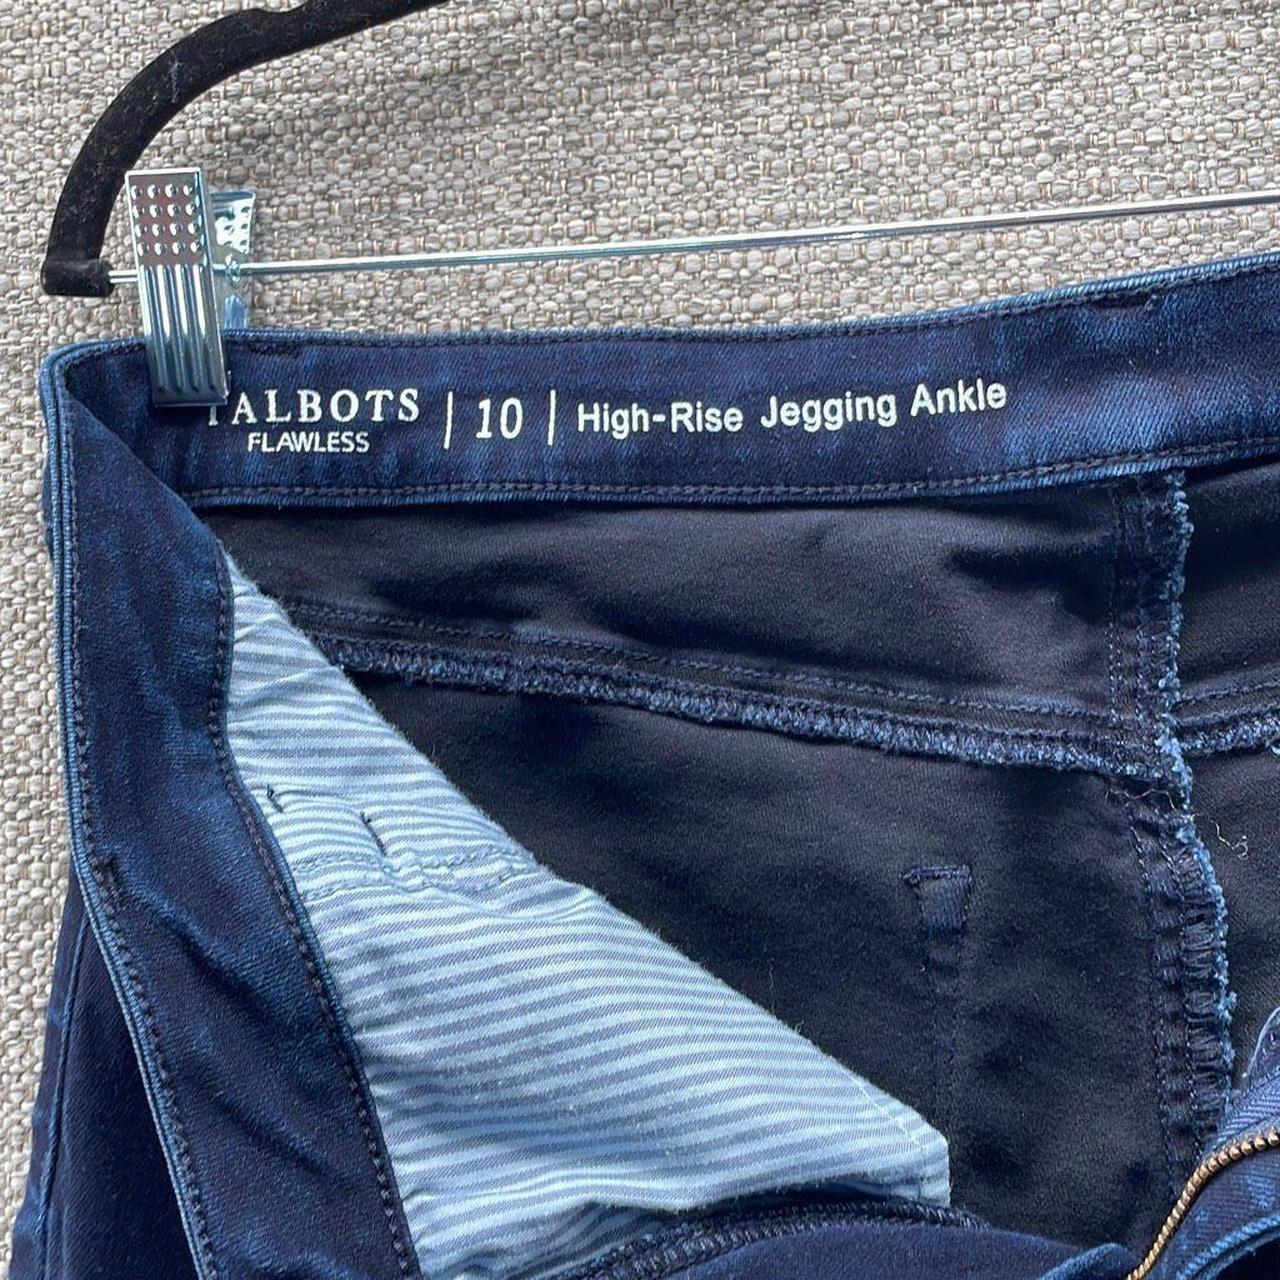 Talbots Flawless High-Waist Jegging Ankle Jeans 10